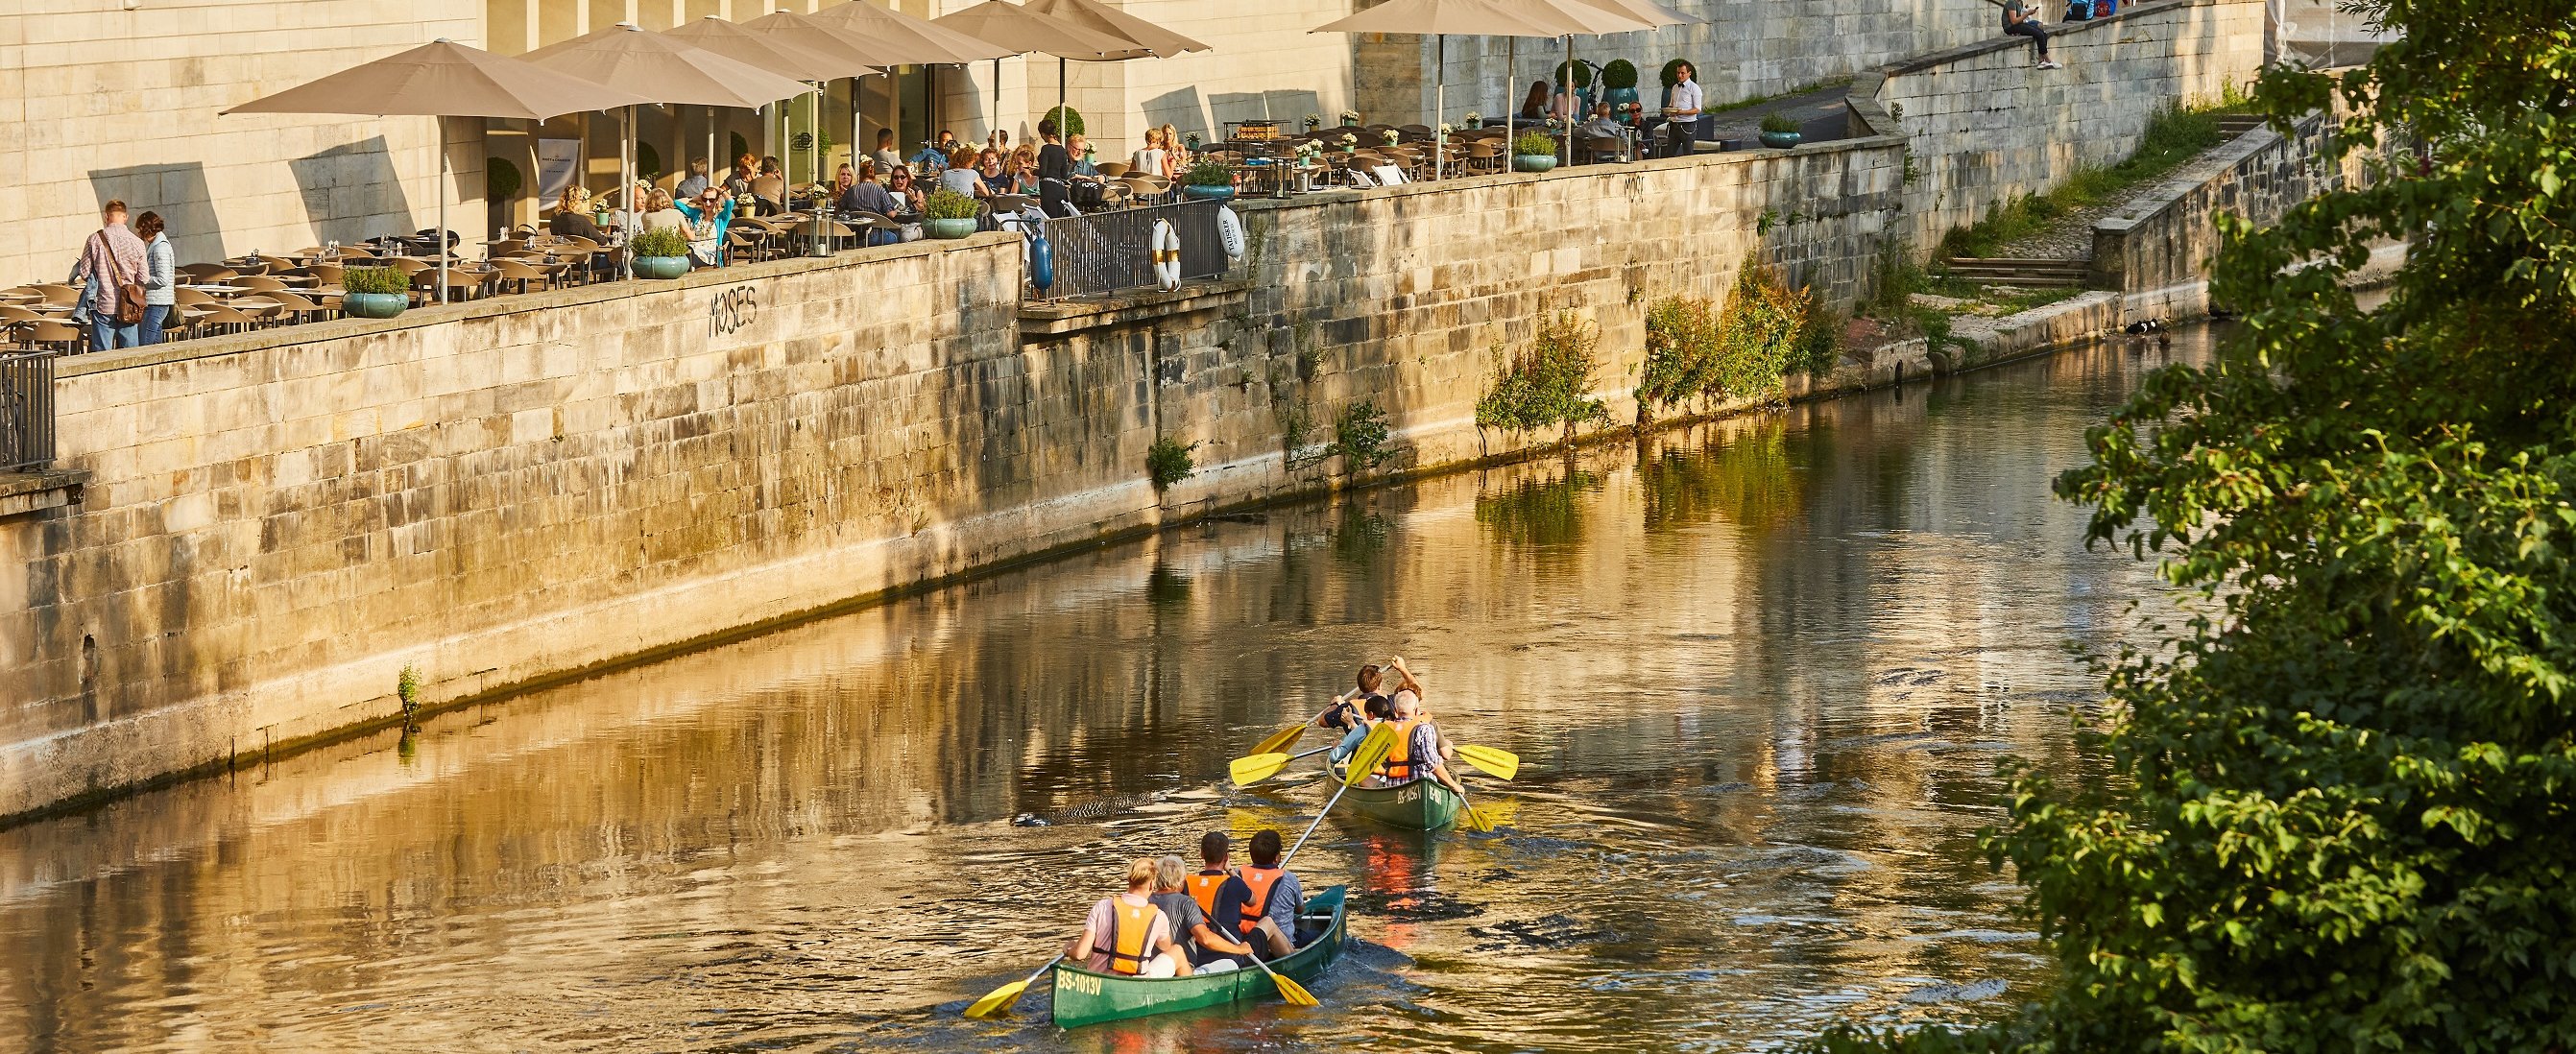 Two canoes with several people are floating on a river that runs through the old town of Hanover.